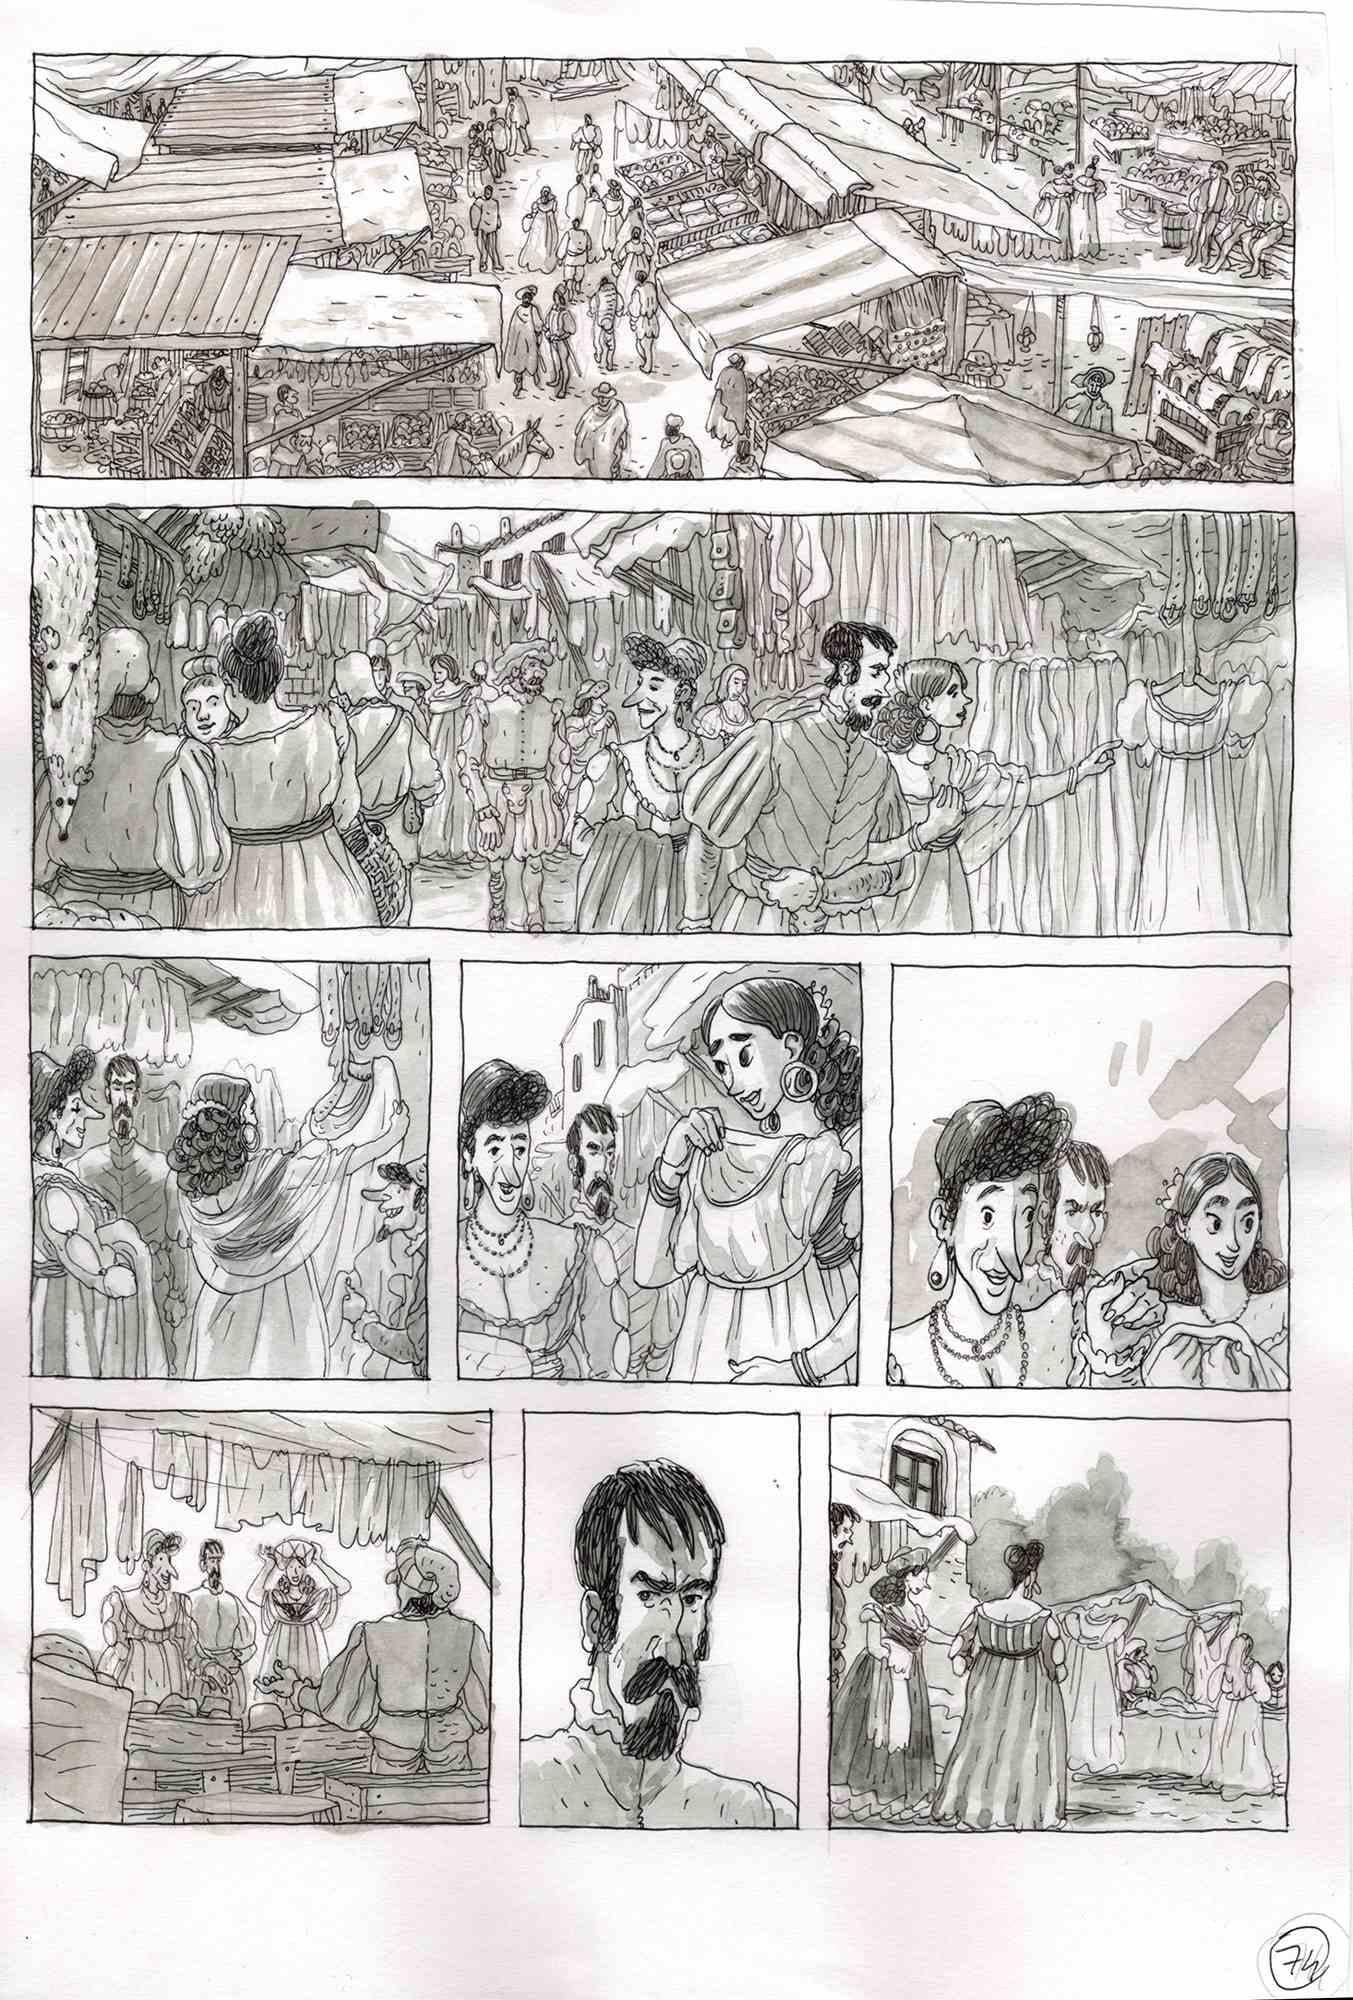 This work entitled "Market day in the Kingdom of Naples" is a board of the graphic novel published in 2016 by Kleiner Flug in Italy "Benvenuto Cellini". The work was done by Vincenzo Bizzarri in 2015 with ink and watercolor on 200gr paper (33x24cm).